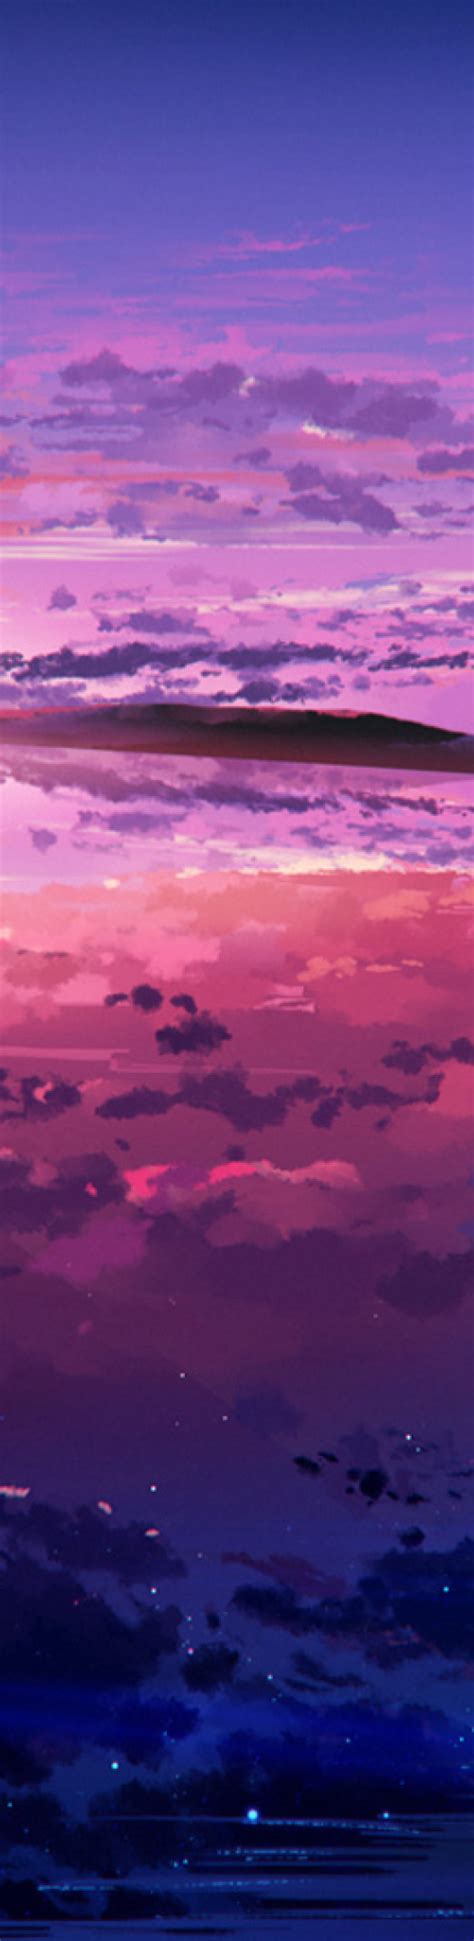 500x2048 Resolution Purple Sunset Reflected In The Ocean 500x2048